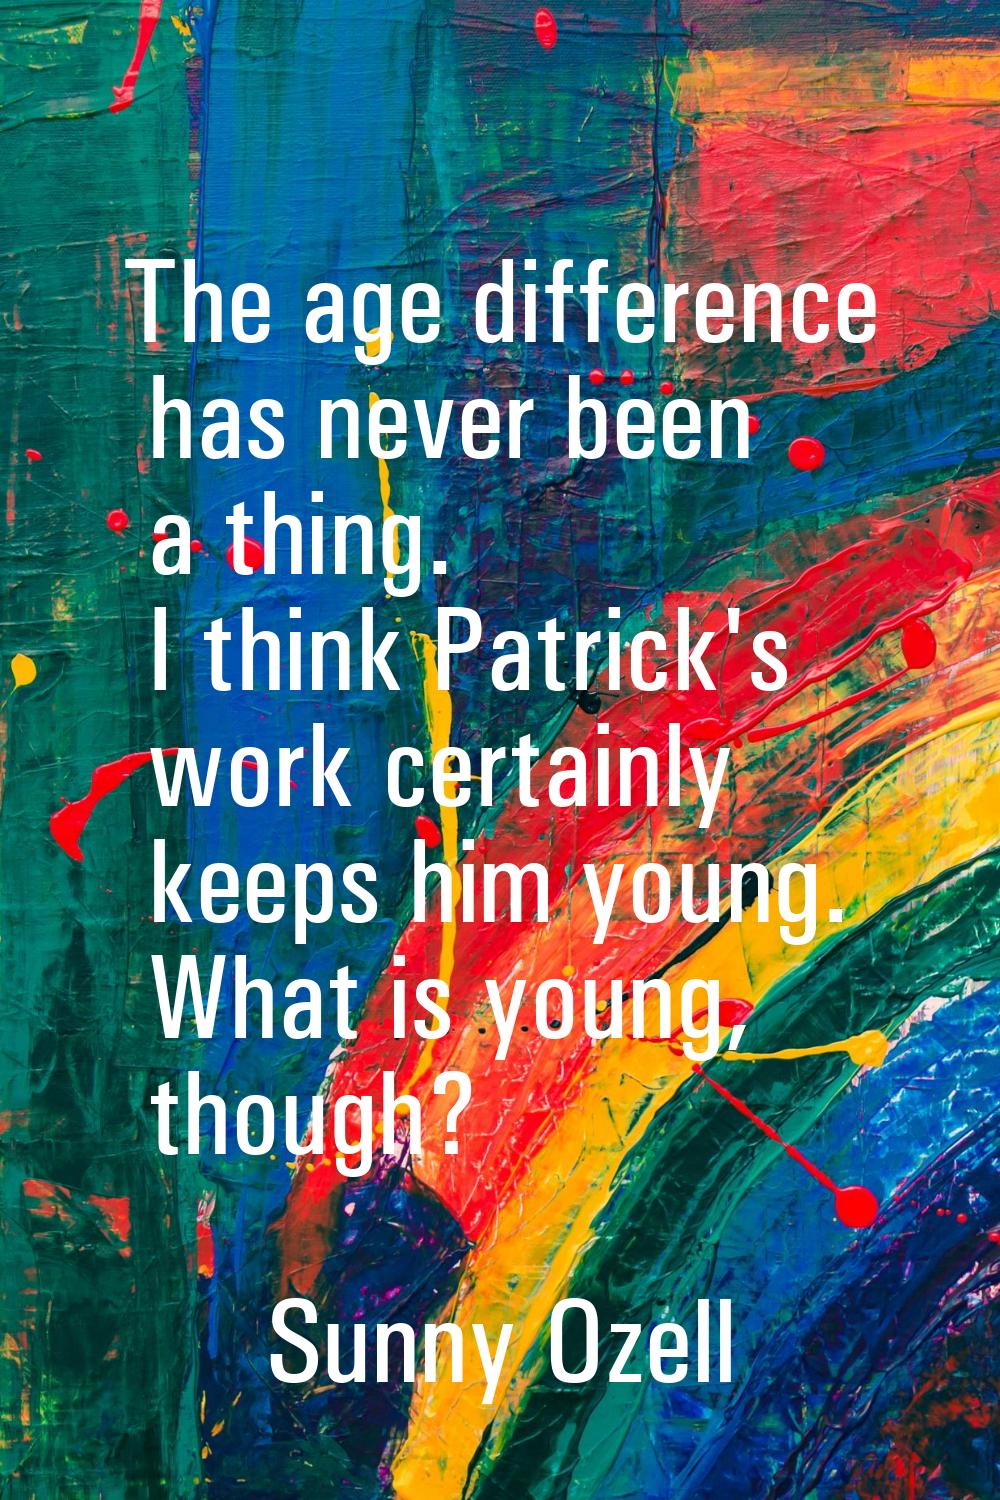 The age difference has never been a thing. I think Patrick's work certainly keeps him young. What i